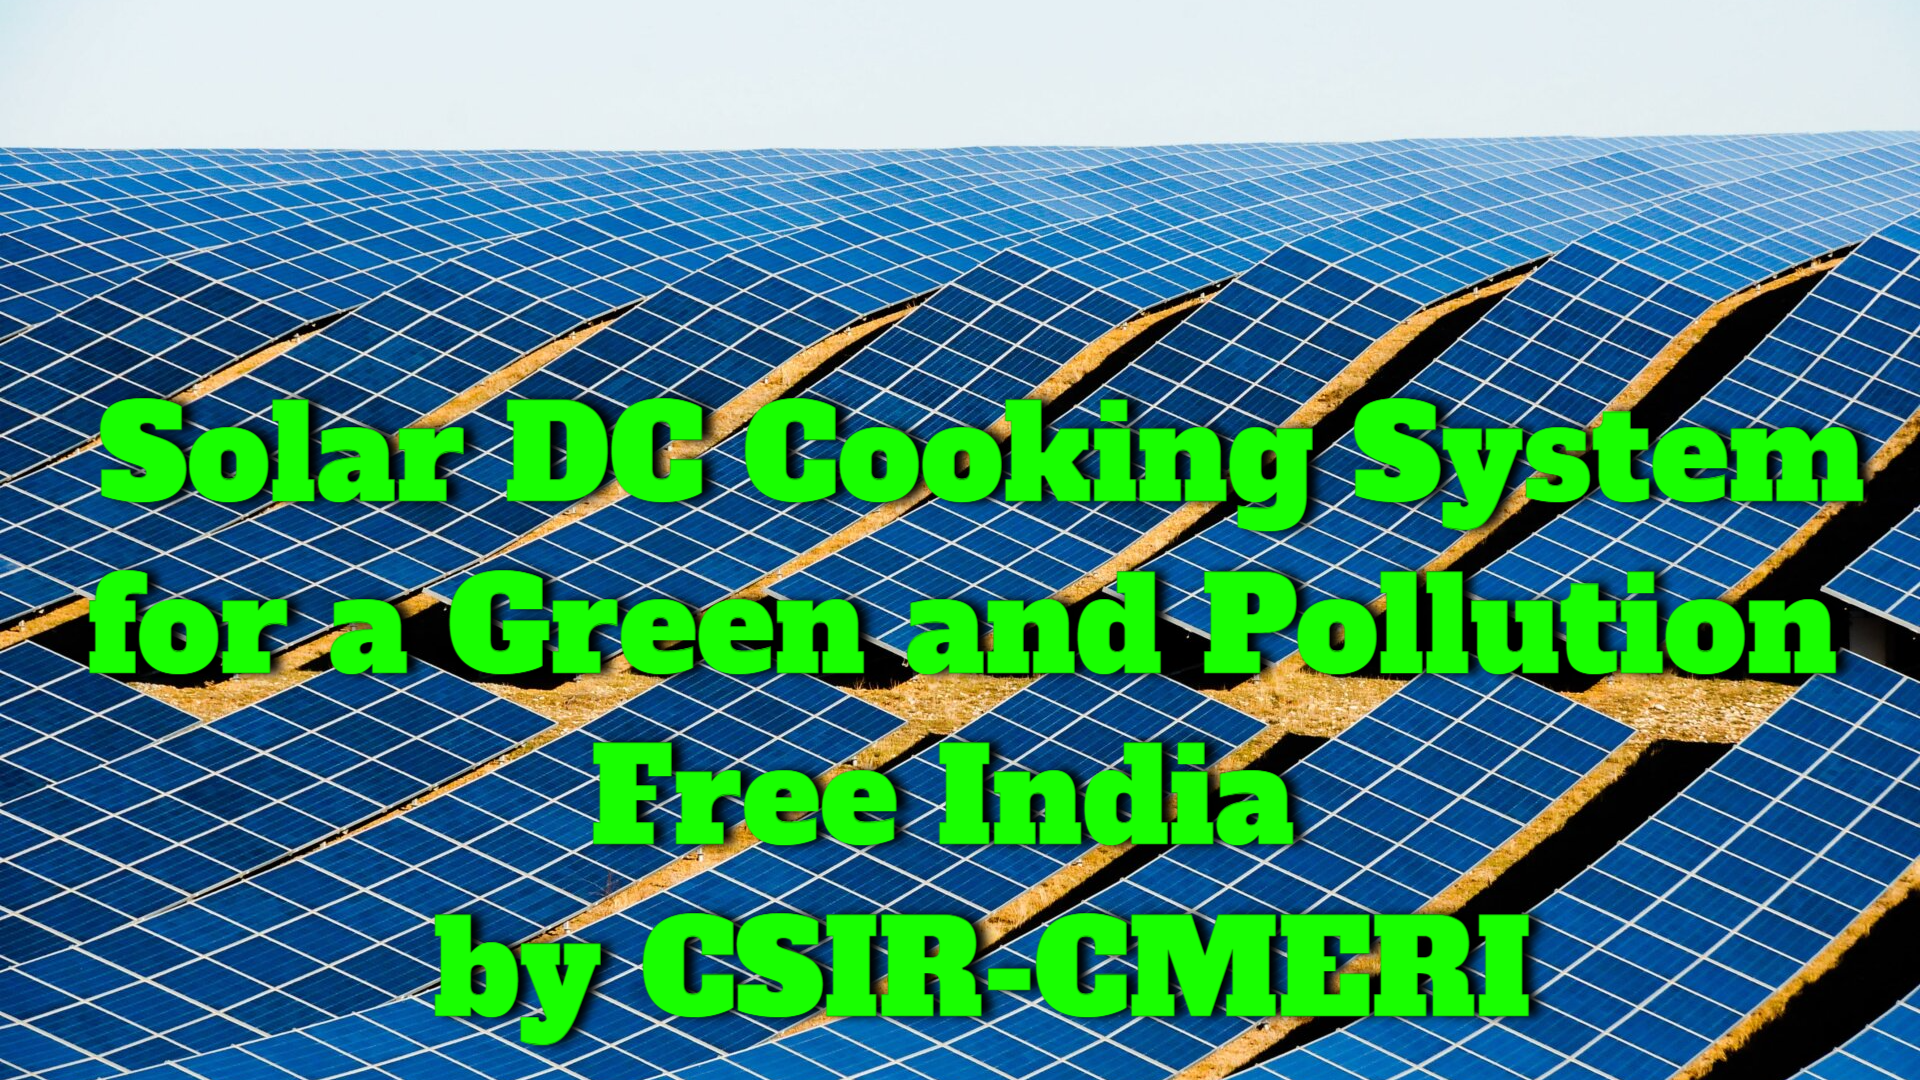 Solar DC Cooking System for a Green and Pollution Free India developed by CSIR-CMERI